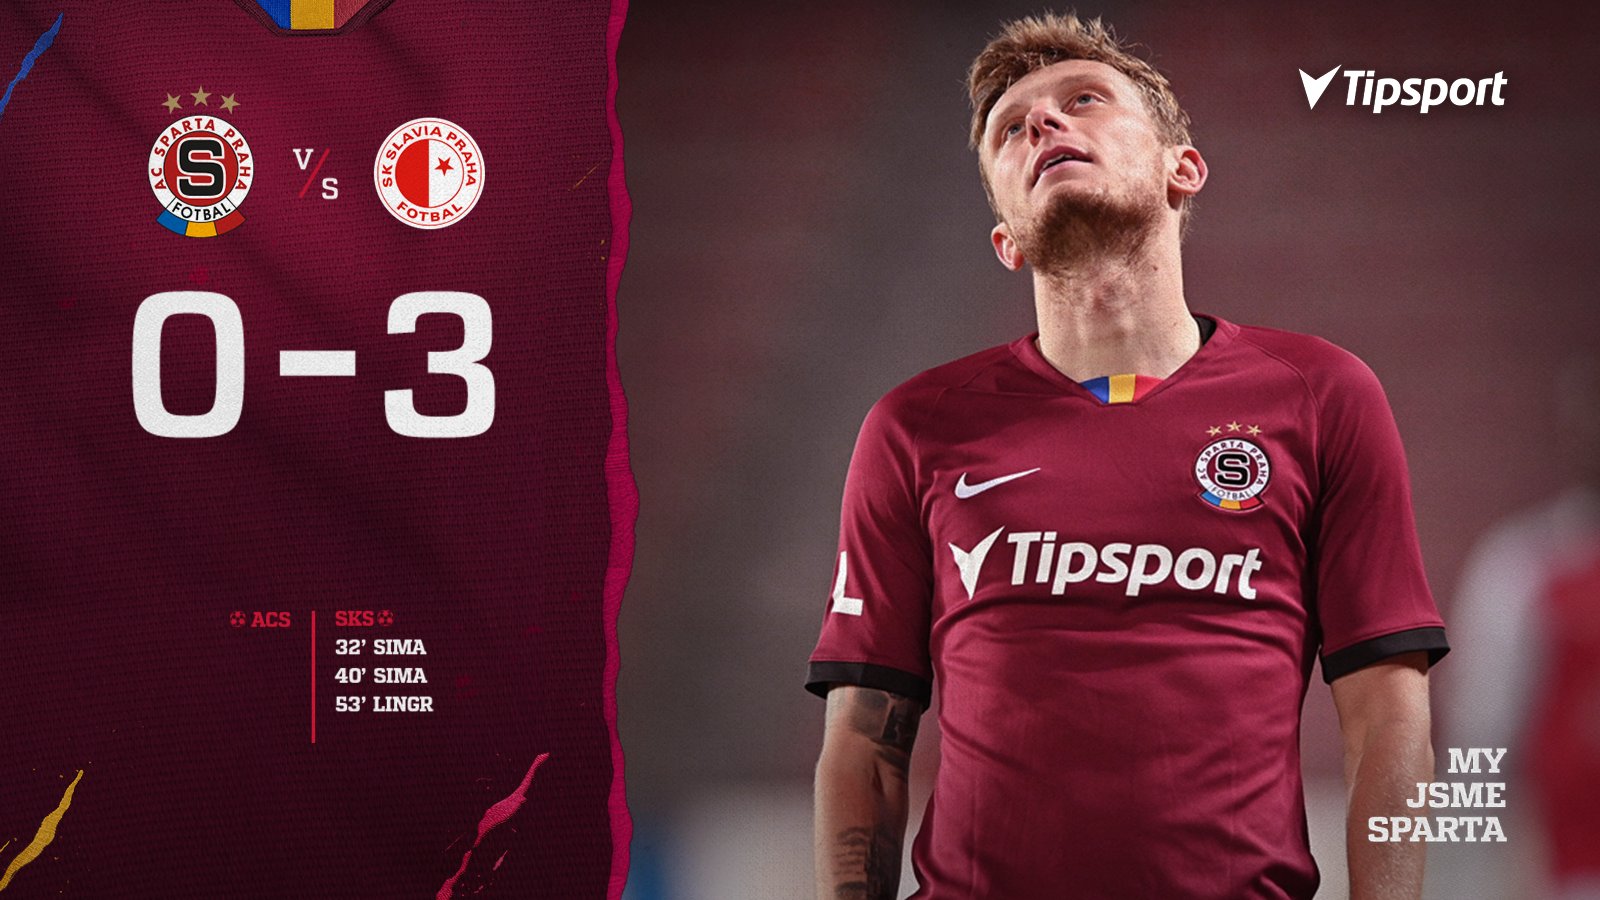 AC Sparta Praha] Sparta Praha beats Slavia Praha 3-2 in the Prague Derby to  go 5 points clear at the top of the table (with only 3 matches to go) :  r/soccer